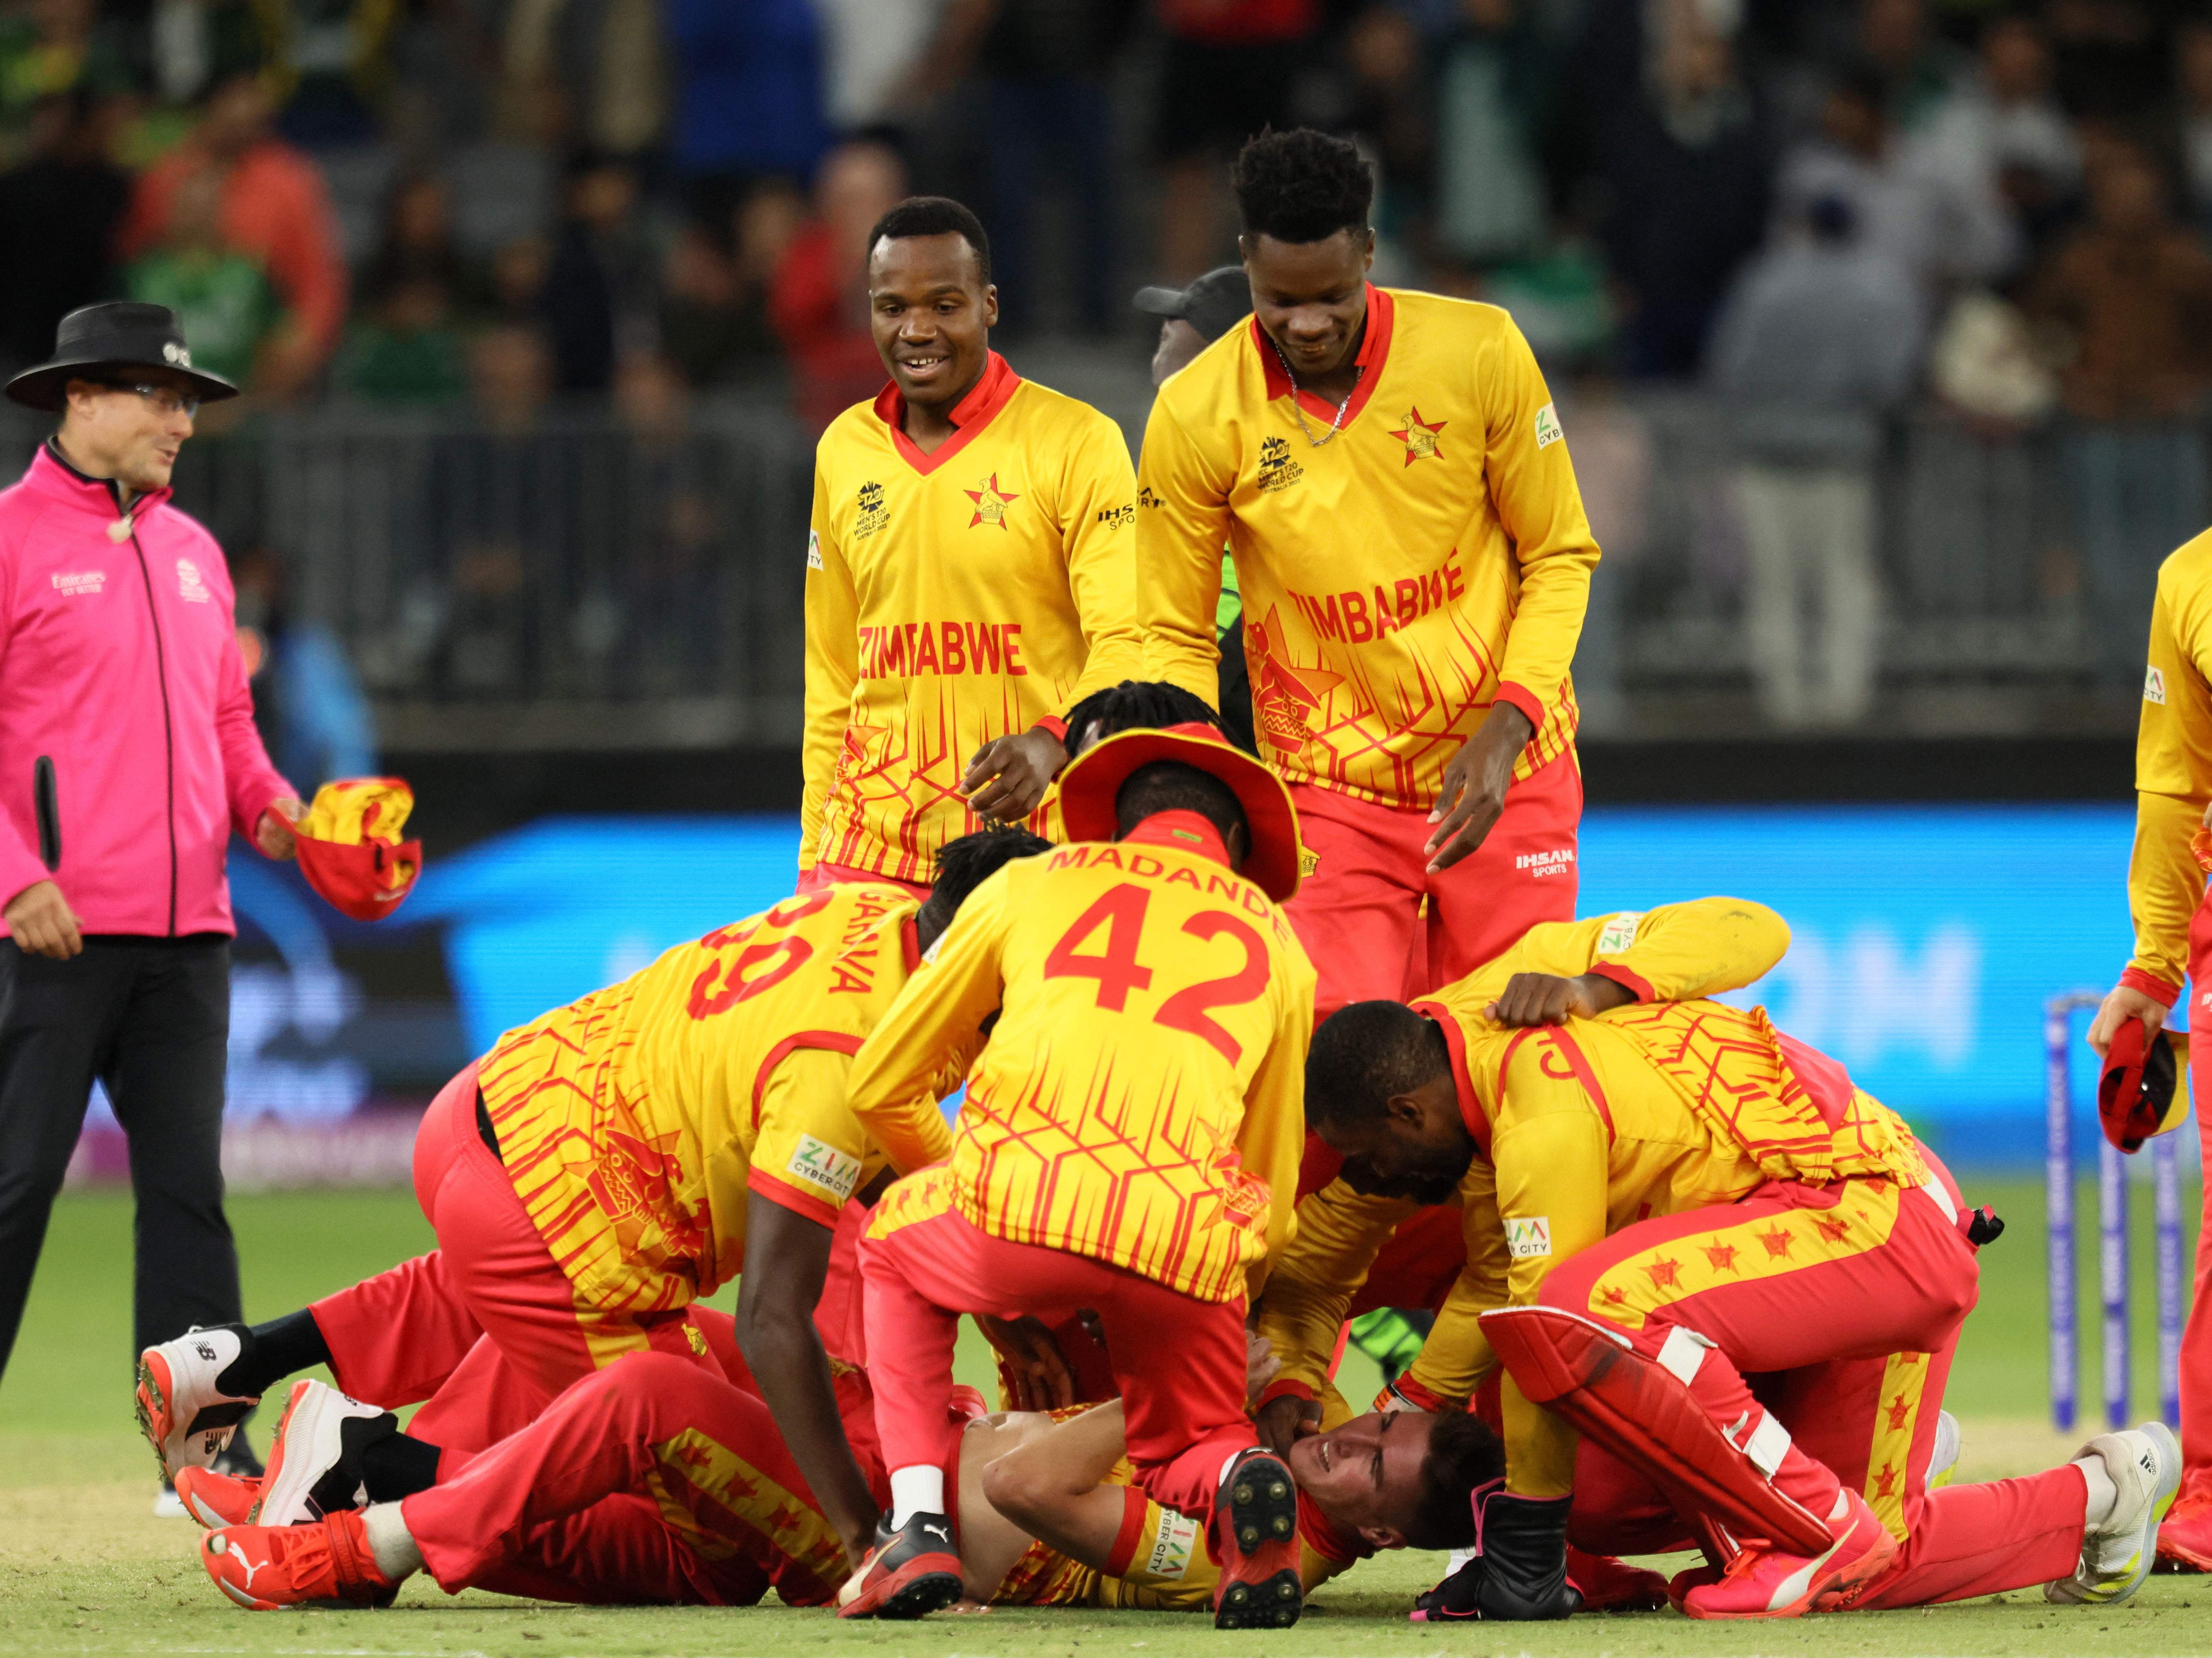 Zimbabwe claimed a famous win in Perth